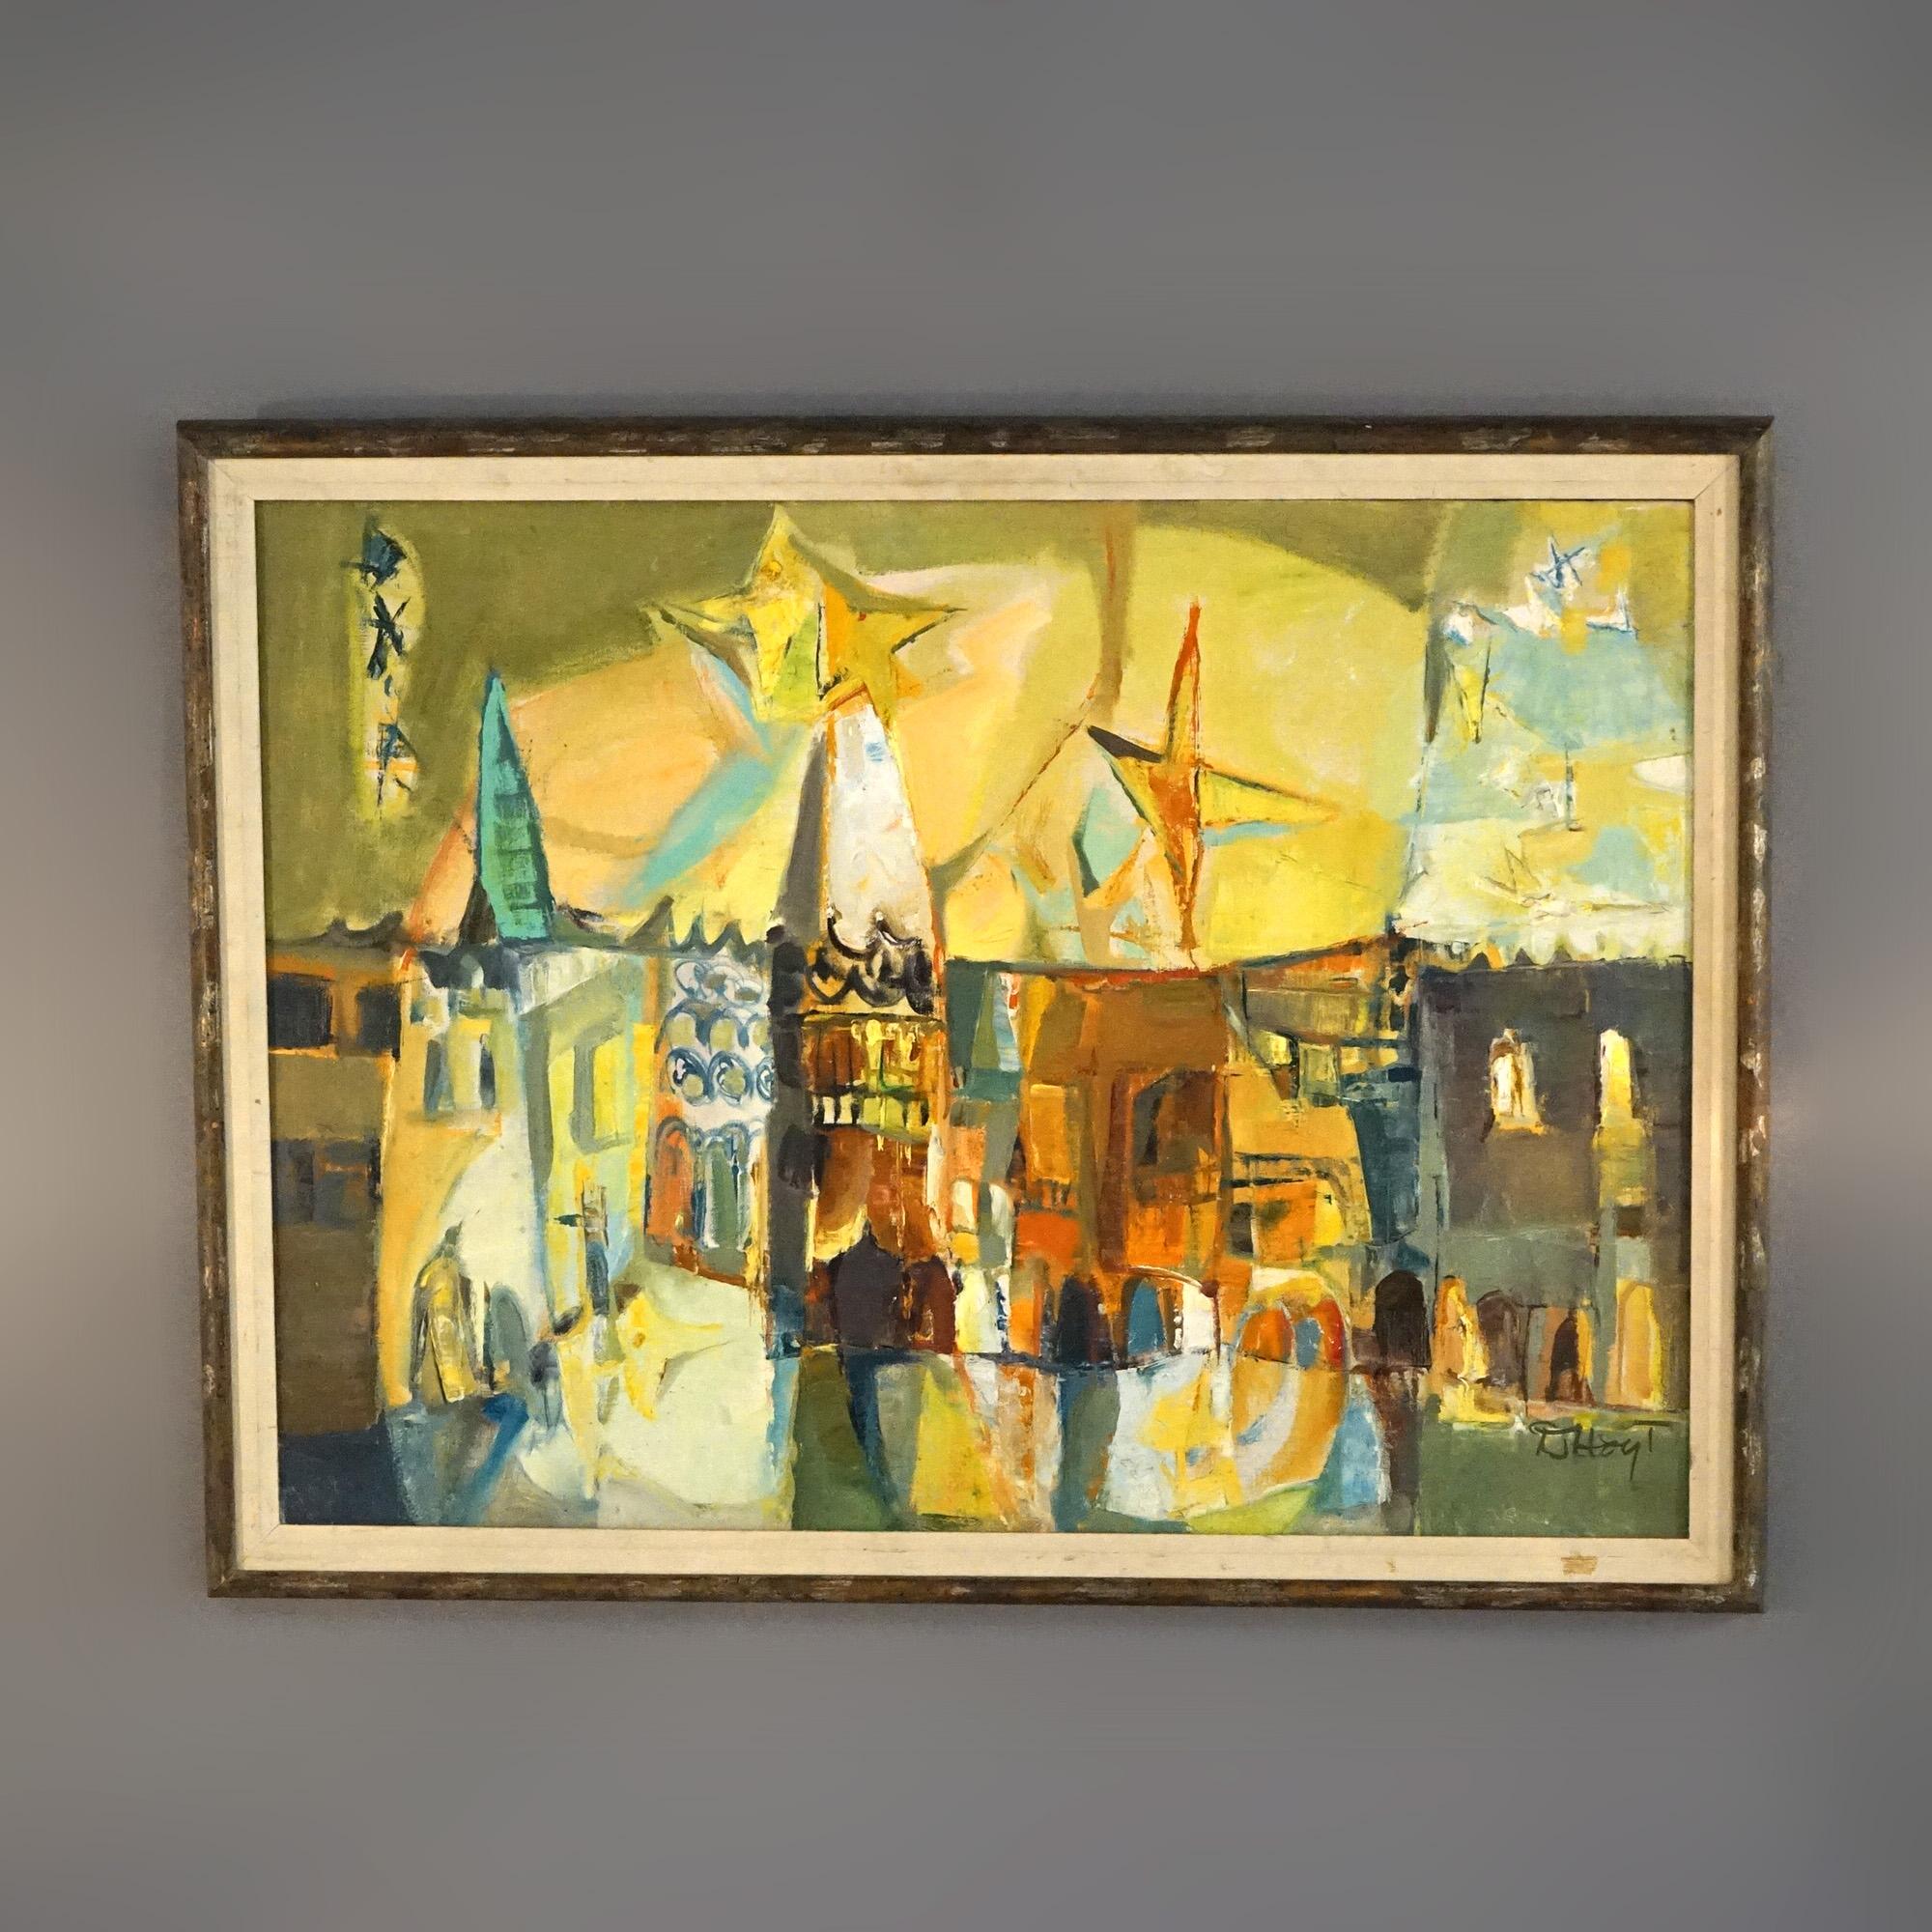 A Mid Century Modern abstract painting by D. Hoyt titled “Venitian Night” offers oil on canvas street scene , artist signed, mid 20thC

Measures - 25